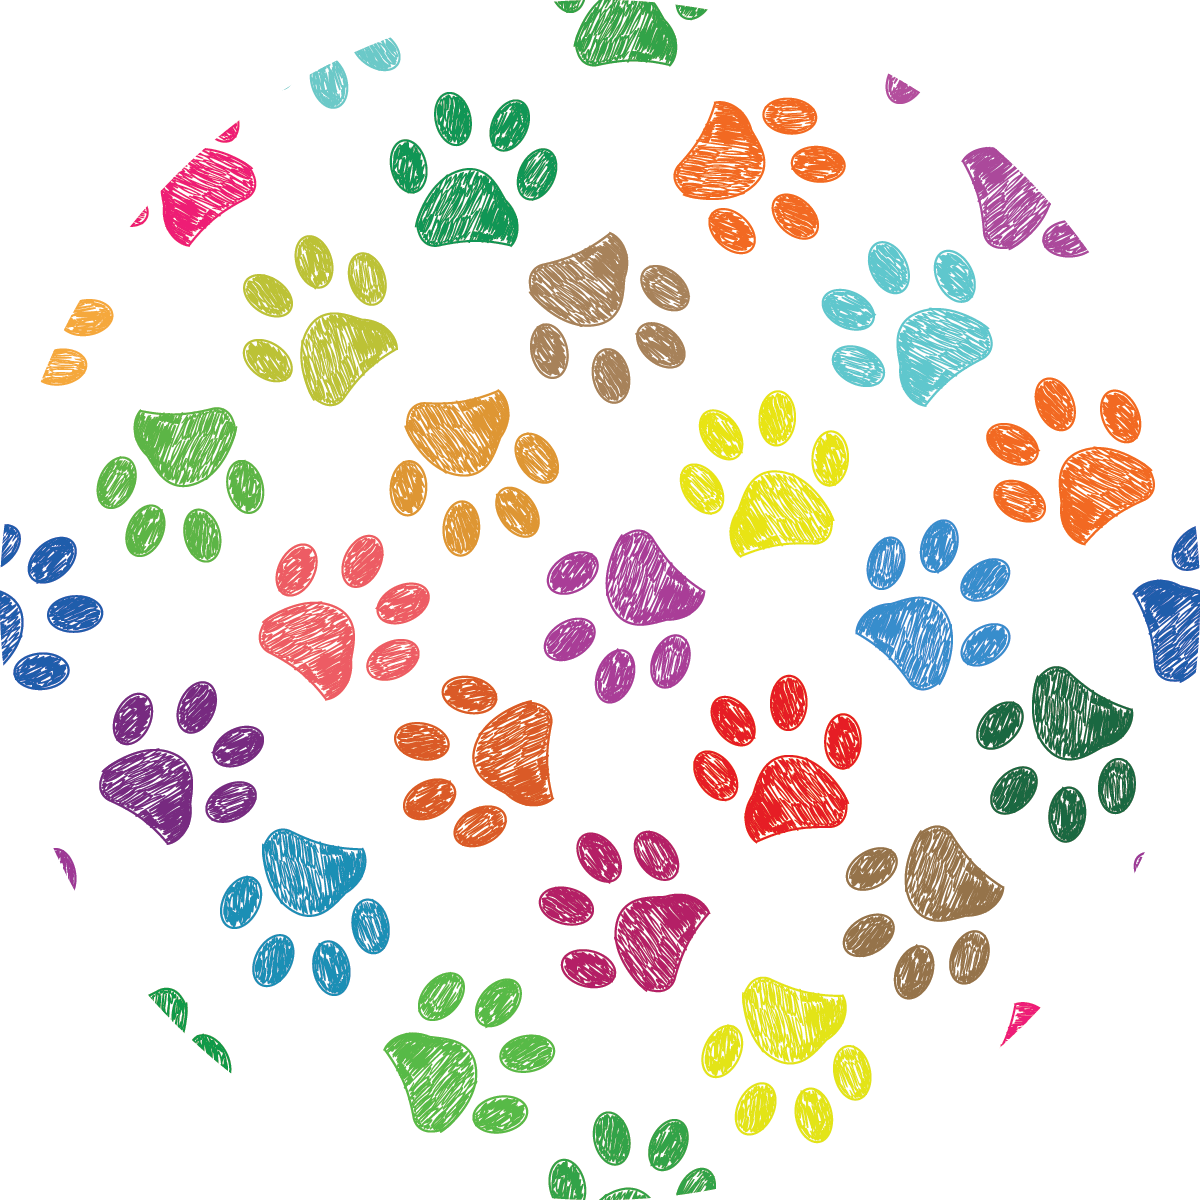 #73 Multi Color Paw Light Christmas Ornament Backing Sticker - Supply for Making Custom Ornaments